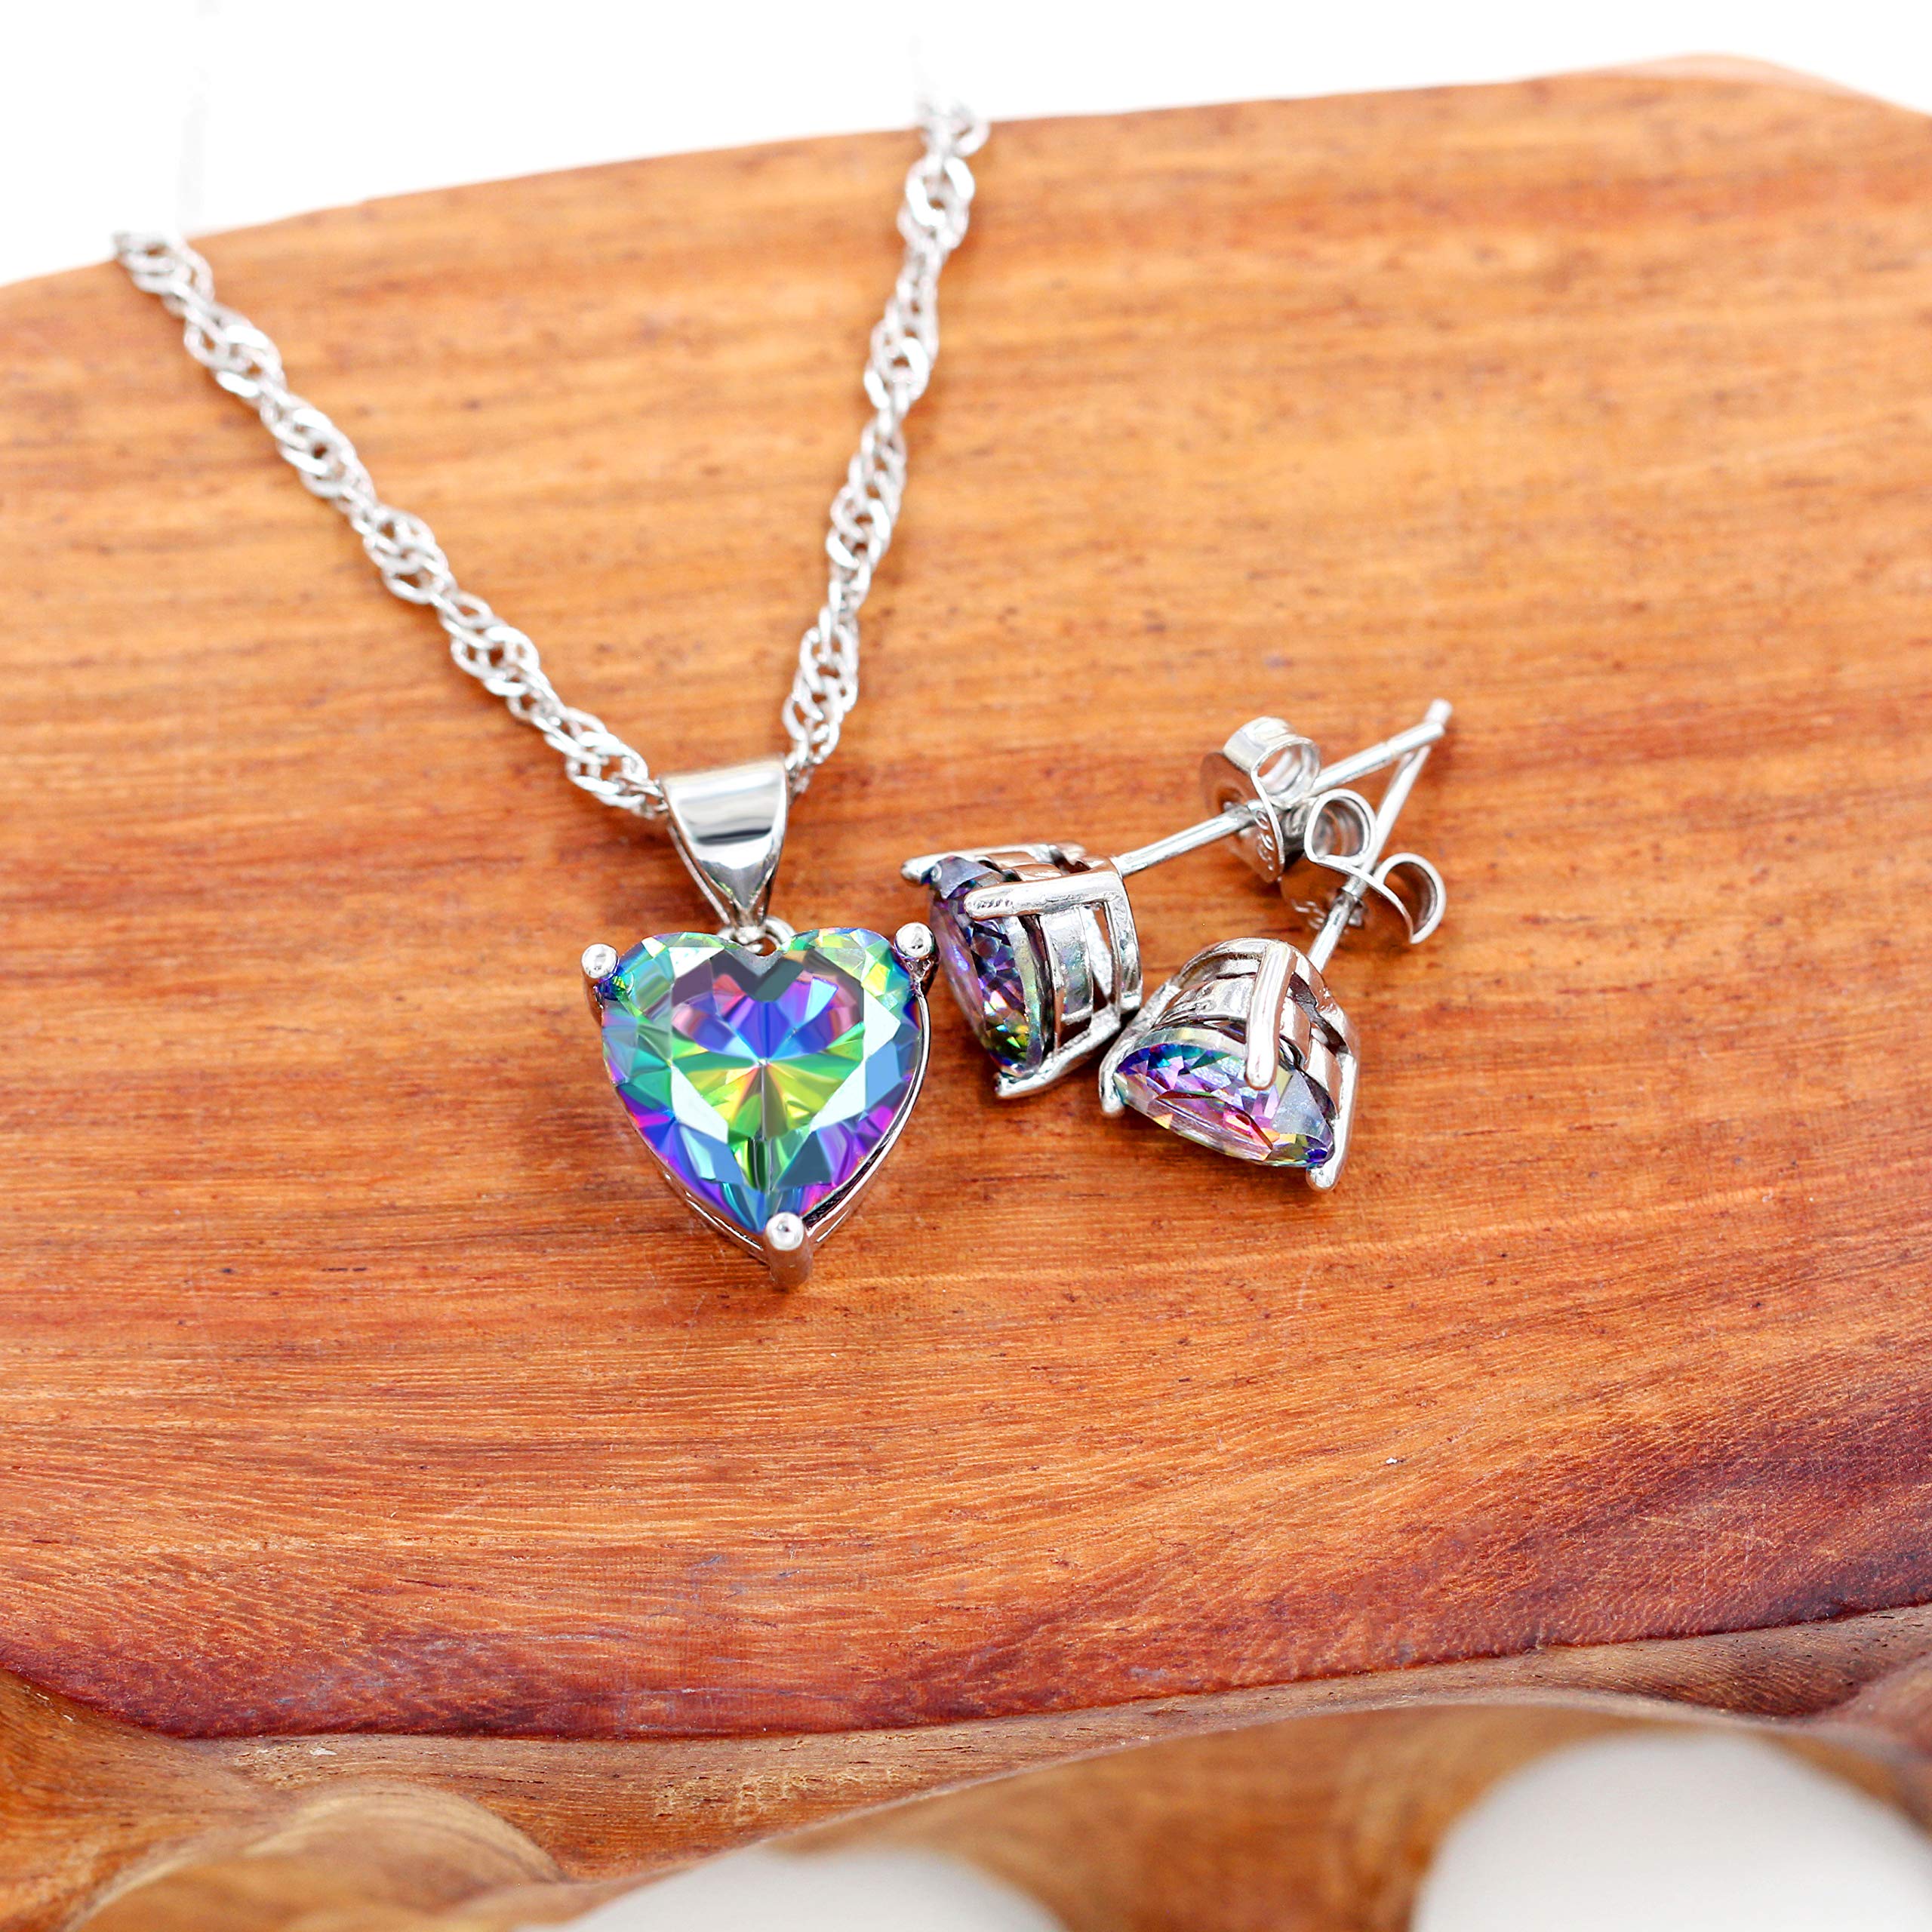 Uloveido 10mm Simulated Mystic Topaz Rainbow Heart Cubic Zirconia Solitaire Pendant Necklace Platinum Plated Y891